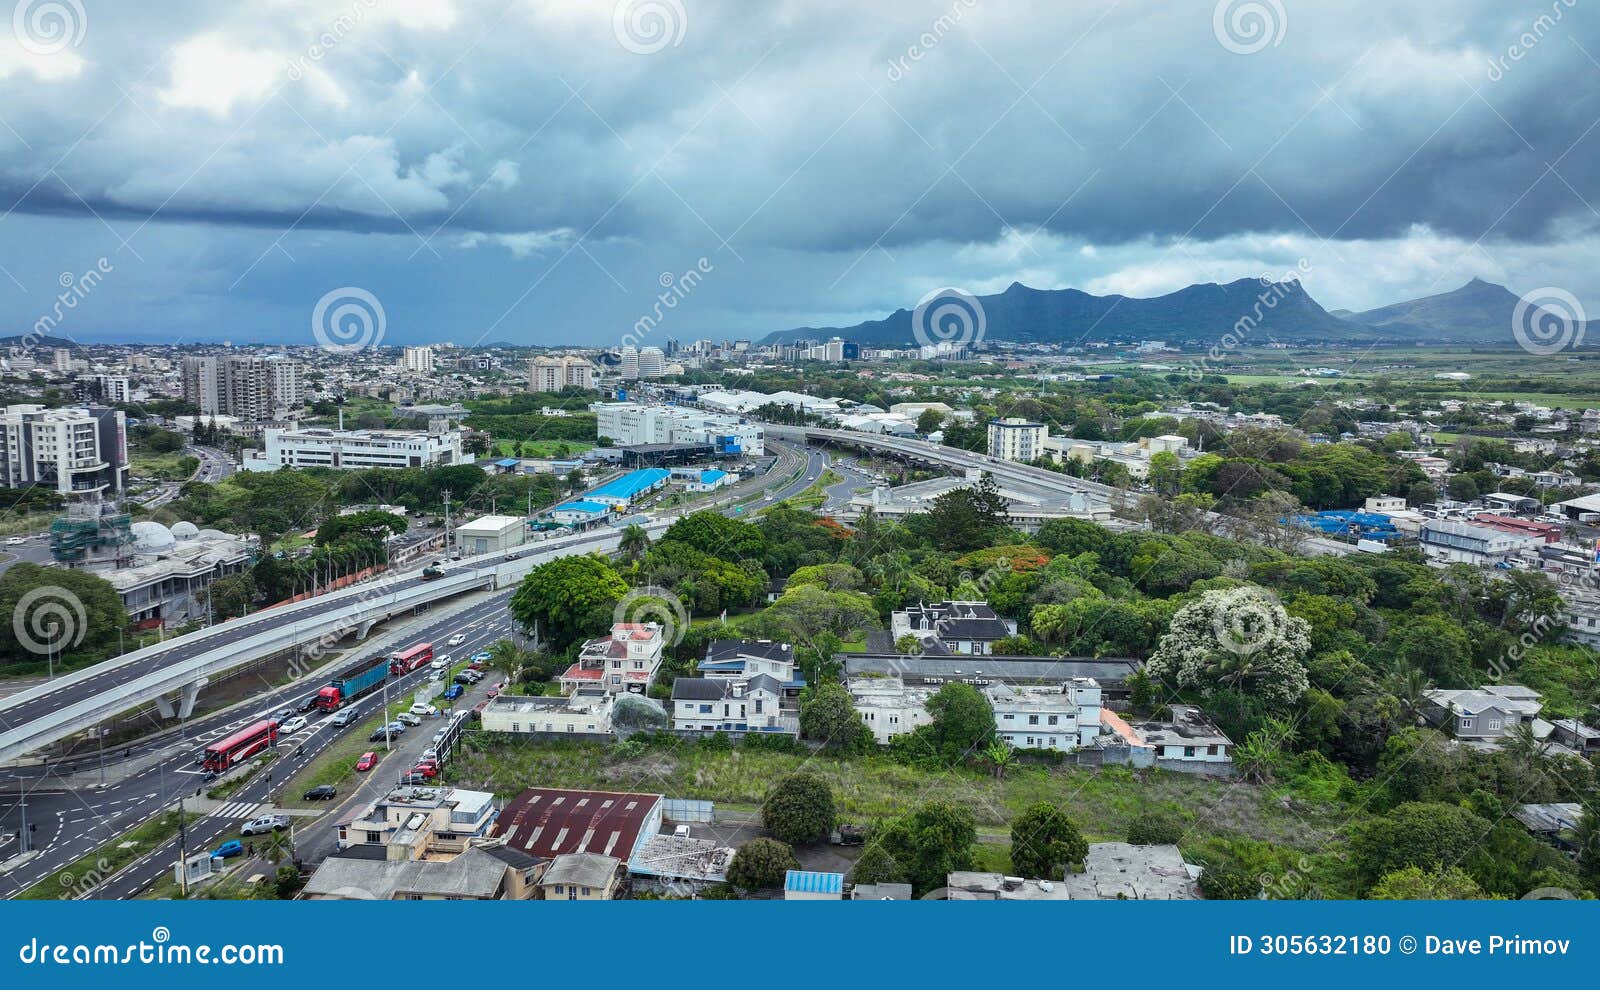 aerial view of quatre bornes city with mountains in background